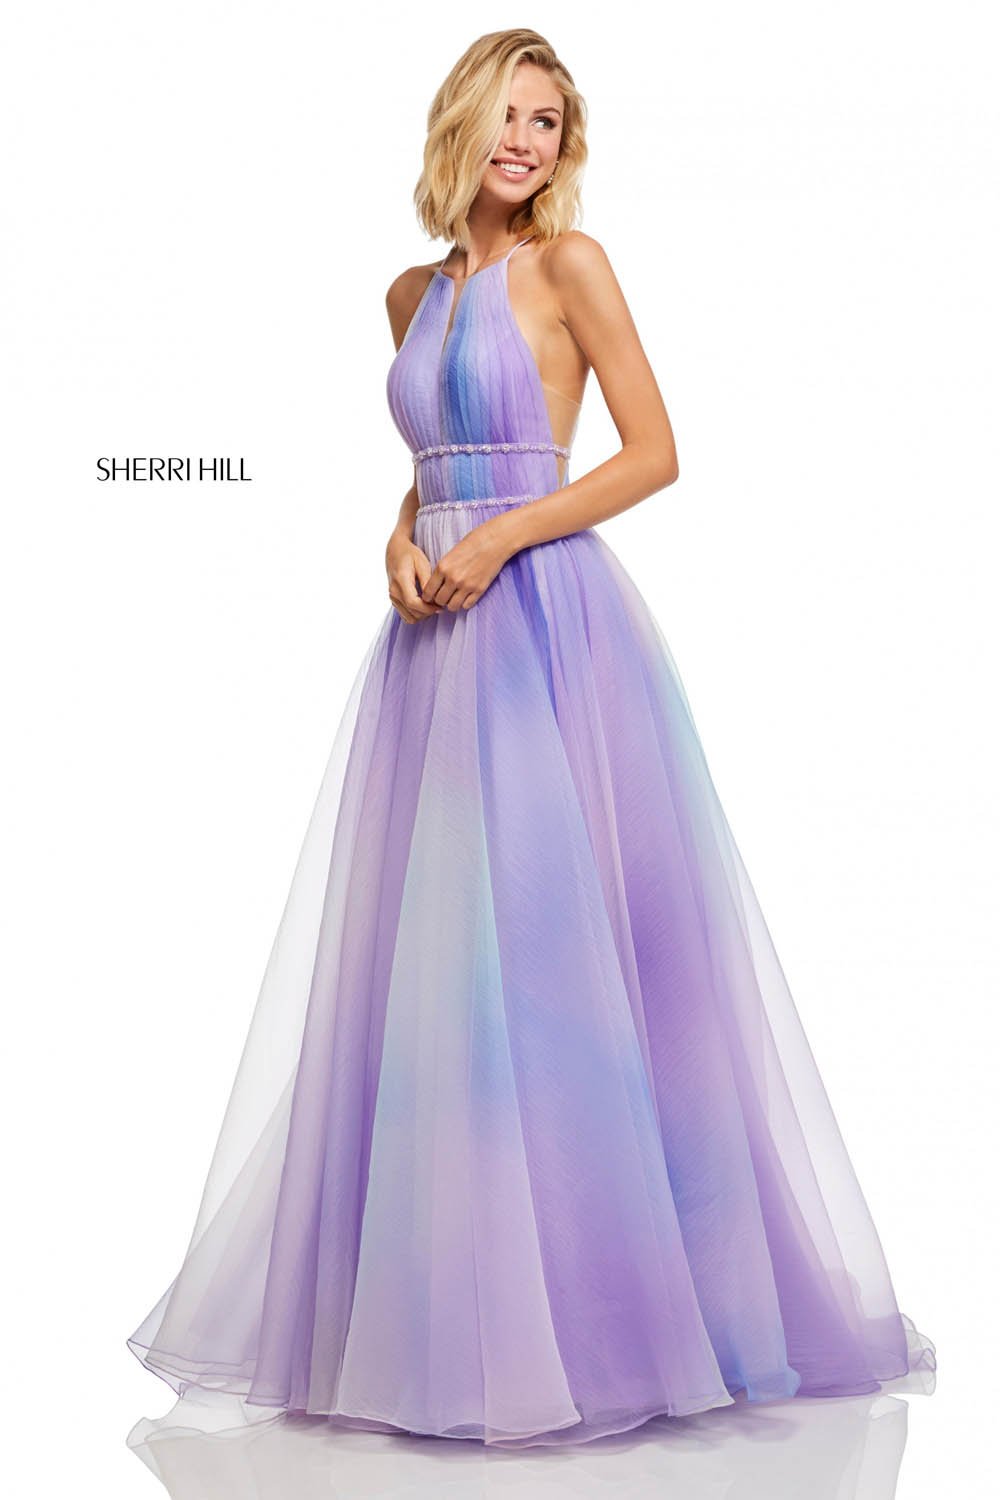 Sherri Hill 52711 dress images in these colors: Lilac, Light Blue, Pink Green.